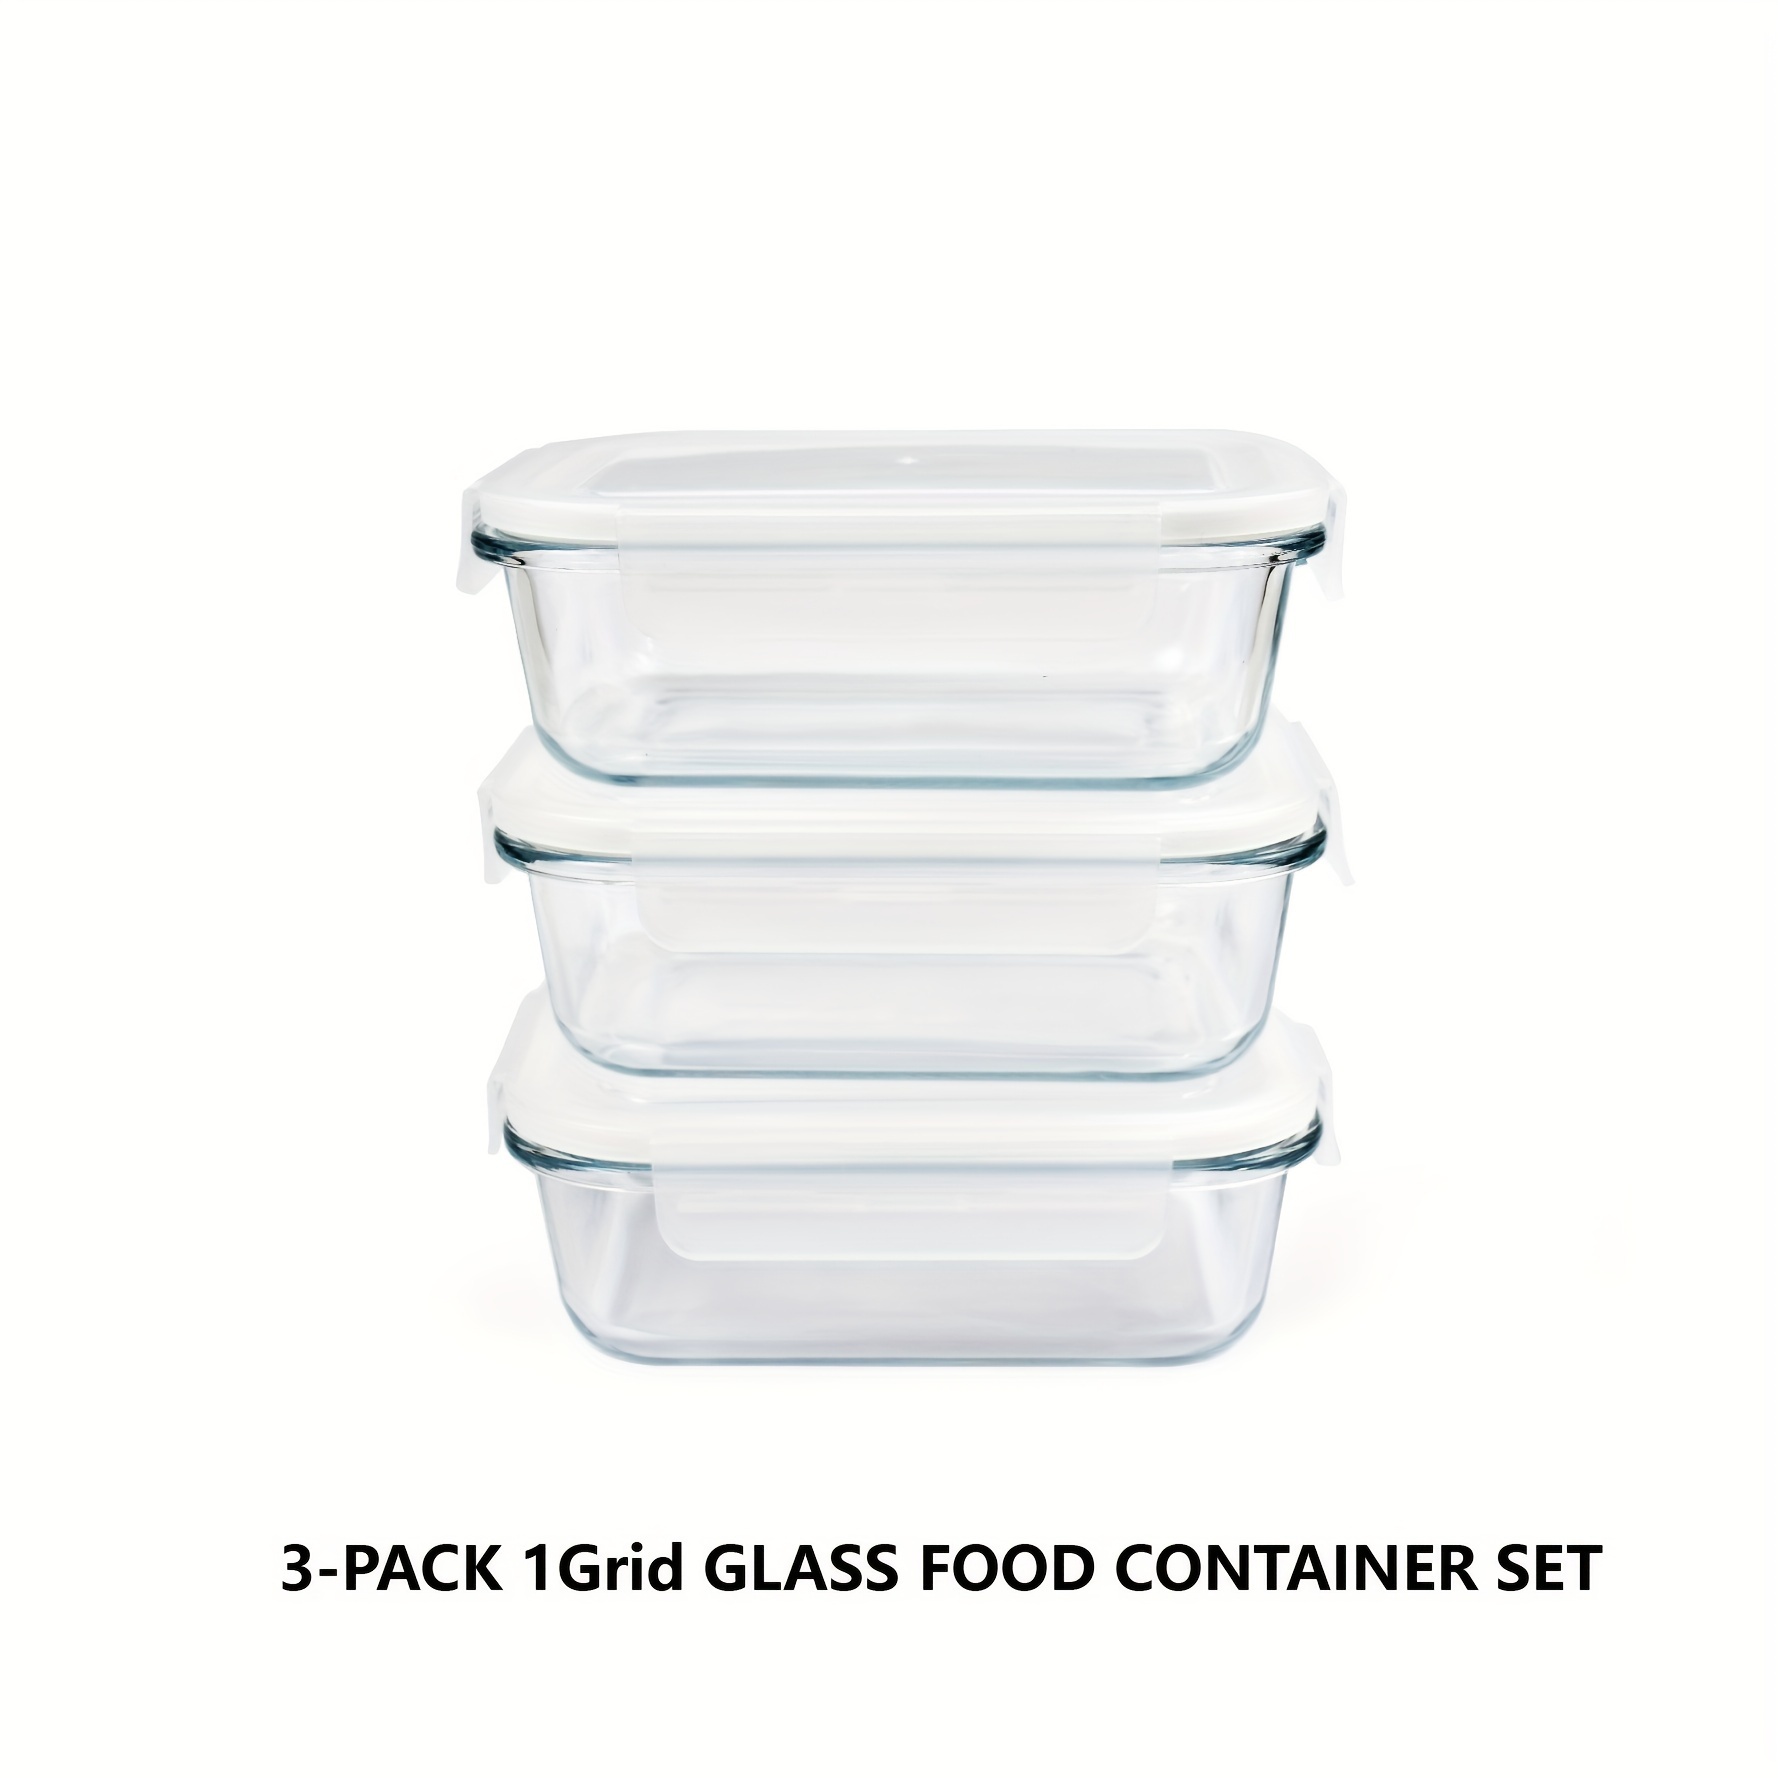 

3pcs High Borosilicate Glass Lunch Box Set, Glass Crisper Microwave Oven Food Heating Bowl, Insulated Fresh-keeping Bento Box, Dishwasher Safe, Leakproof Food Container, Home Kitchen Supplies